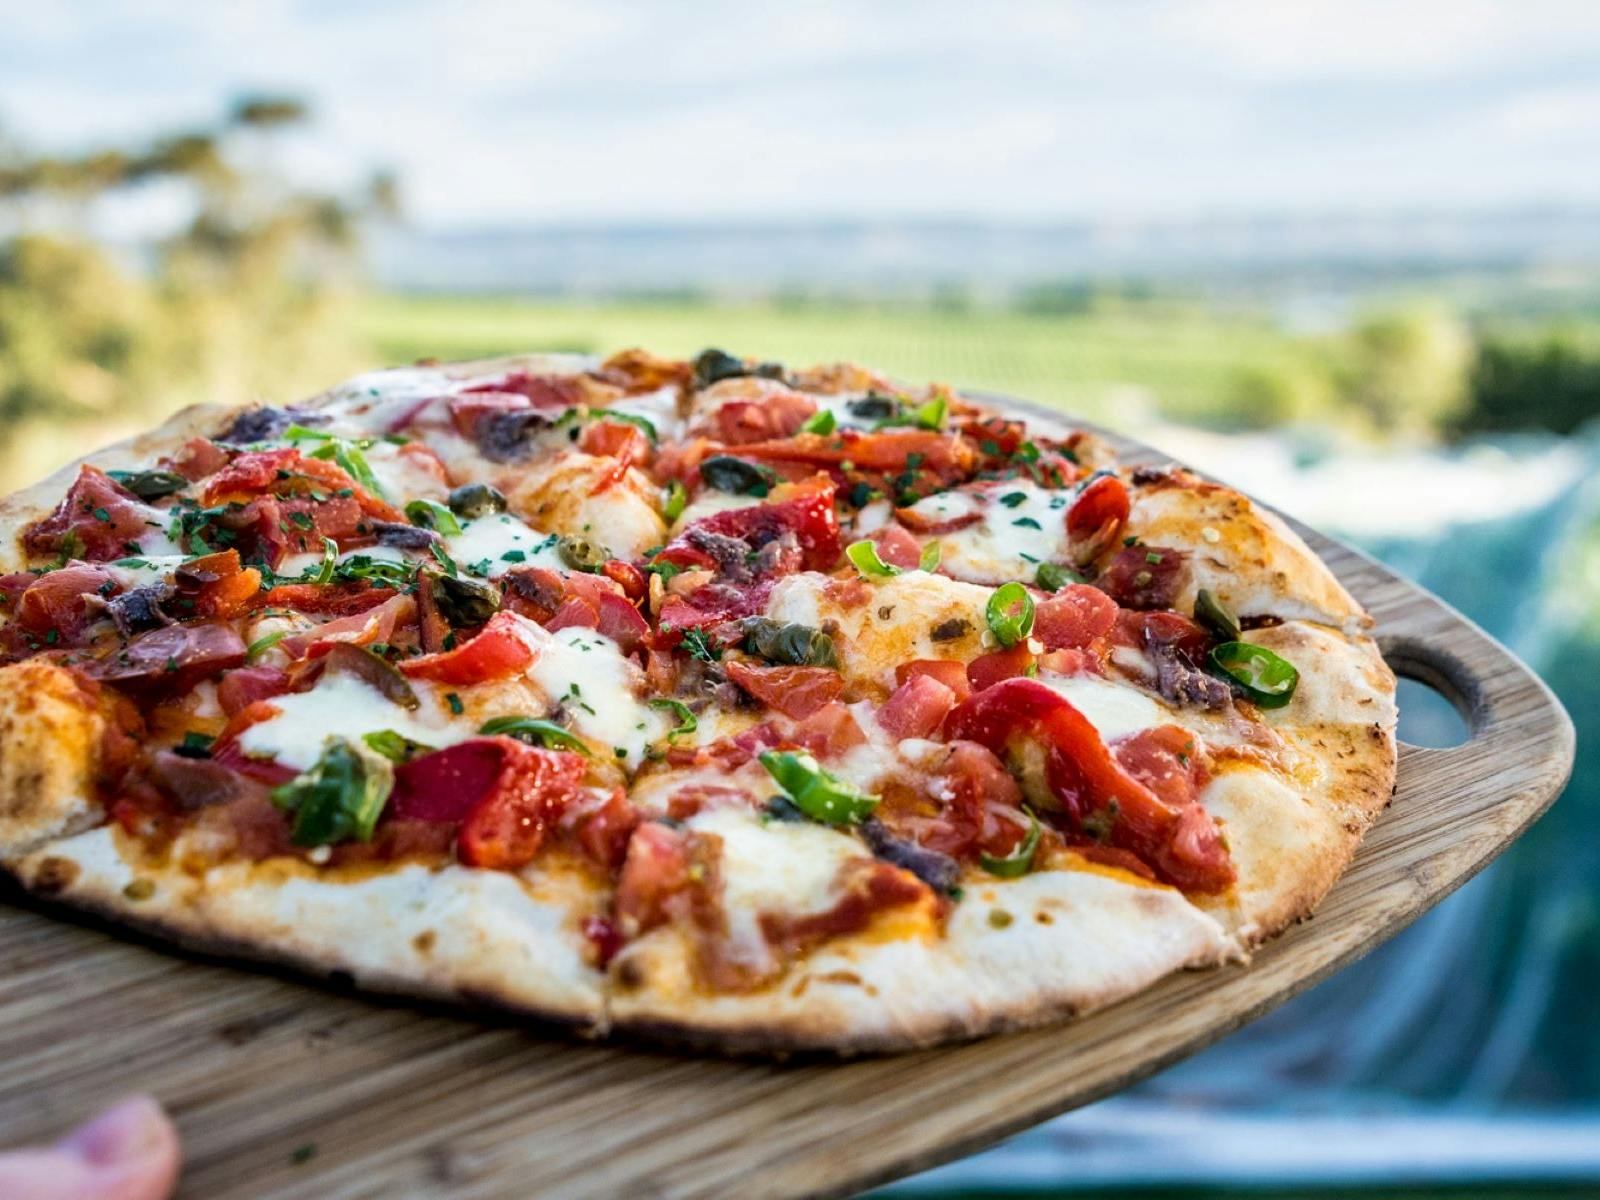 Wood Oven Pizza with view in background